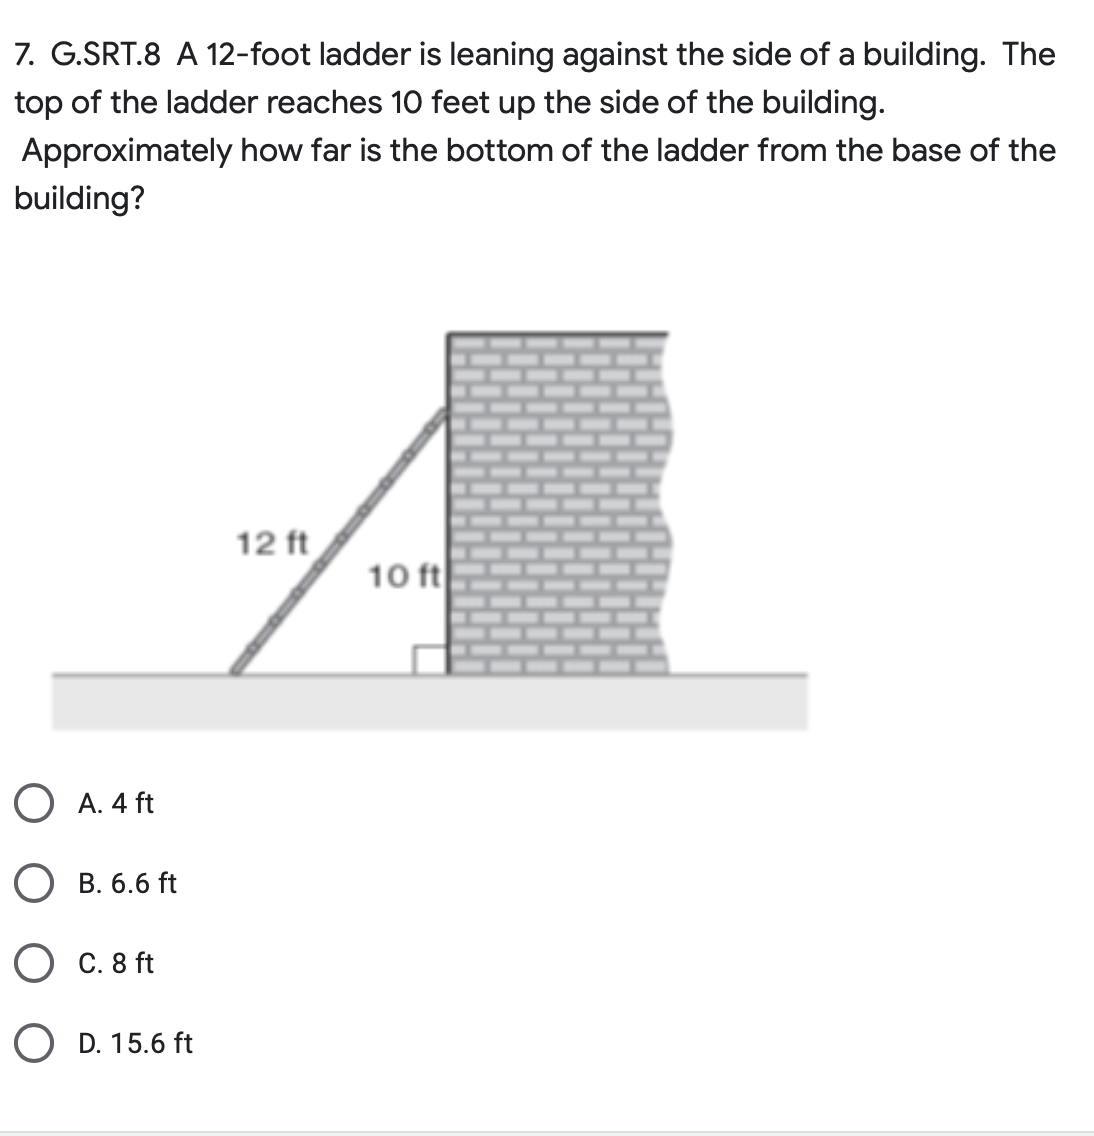 7. G.SRT.8 A 12-foot ladder is leaning against the side of a building. The
top of the ladder reaches 10 feet up the side of the building.
Approximately how far is the bottom of the ladder from the base of the
building?
O A. 4 ft
B. 6.6 ft
C. 8 ft
OD. 15.6 ft
12 ft
10 ft